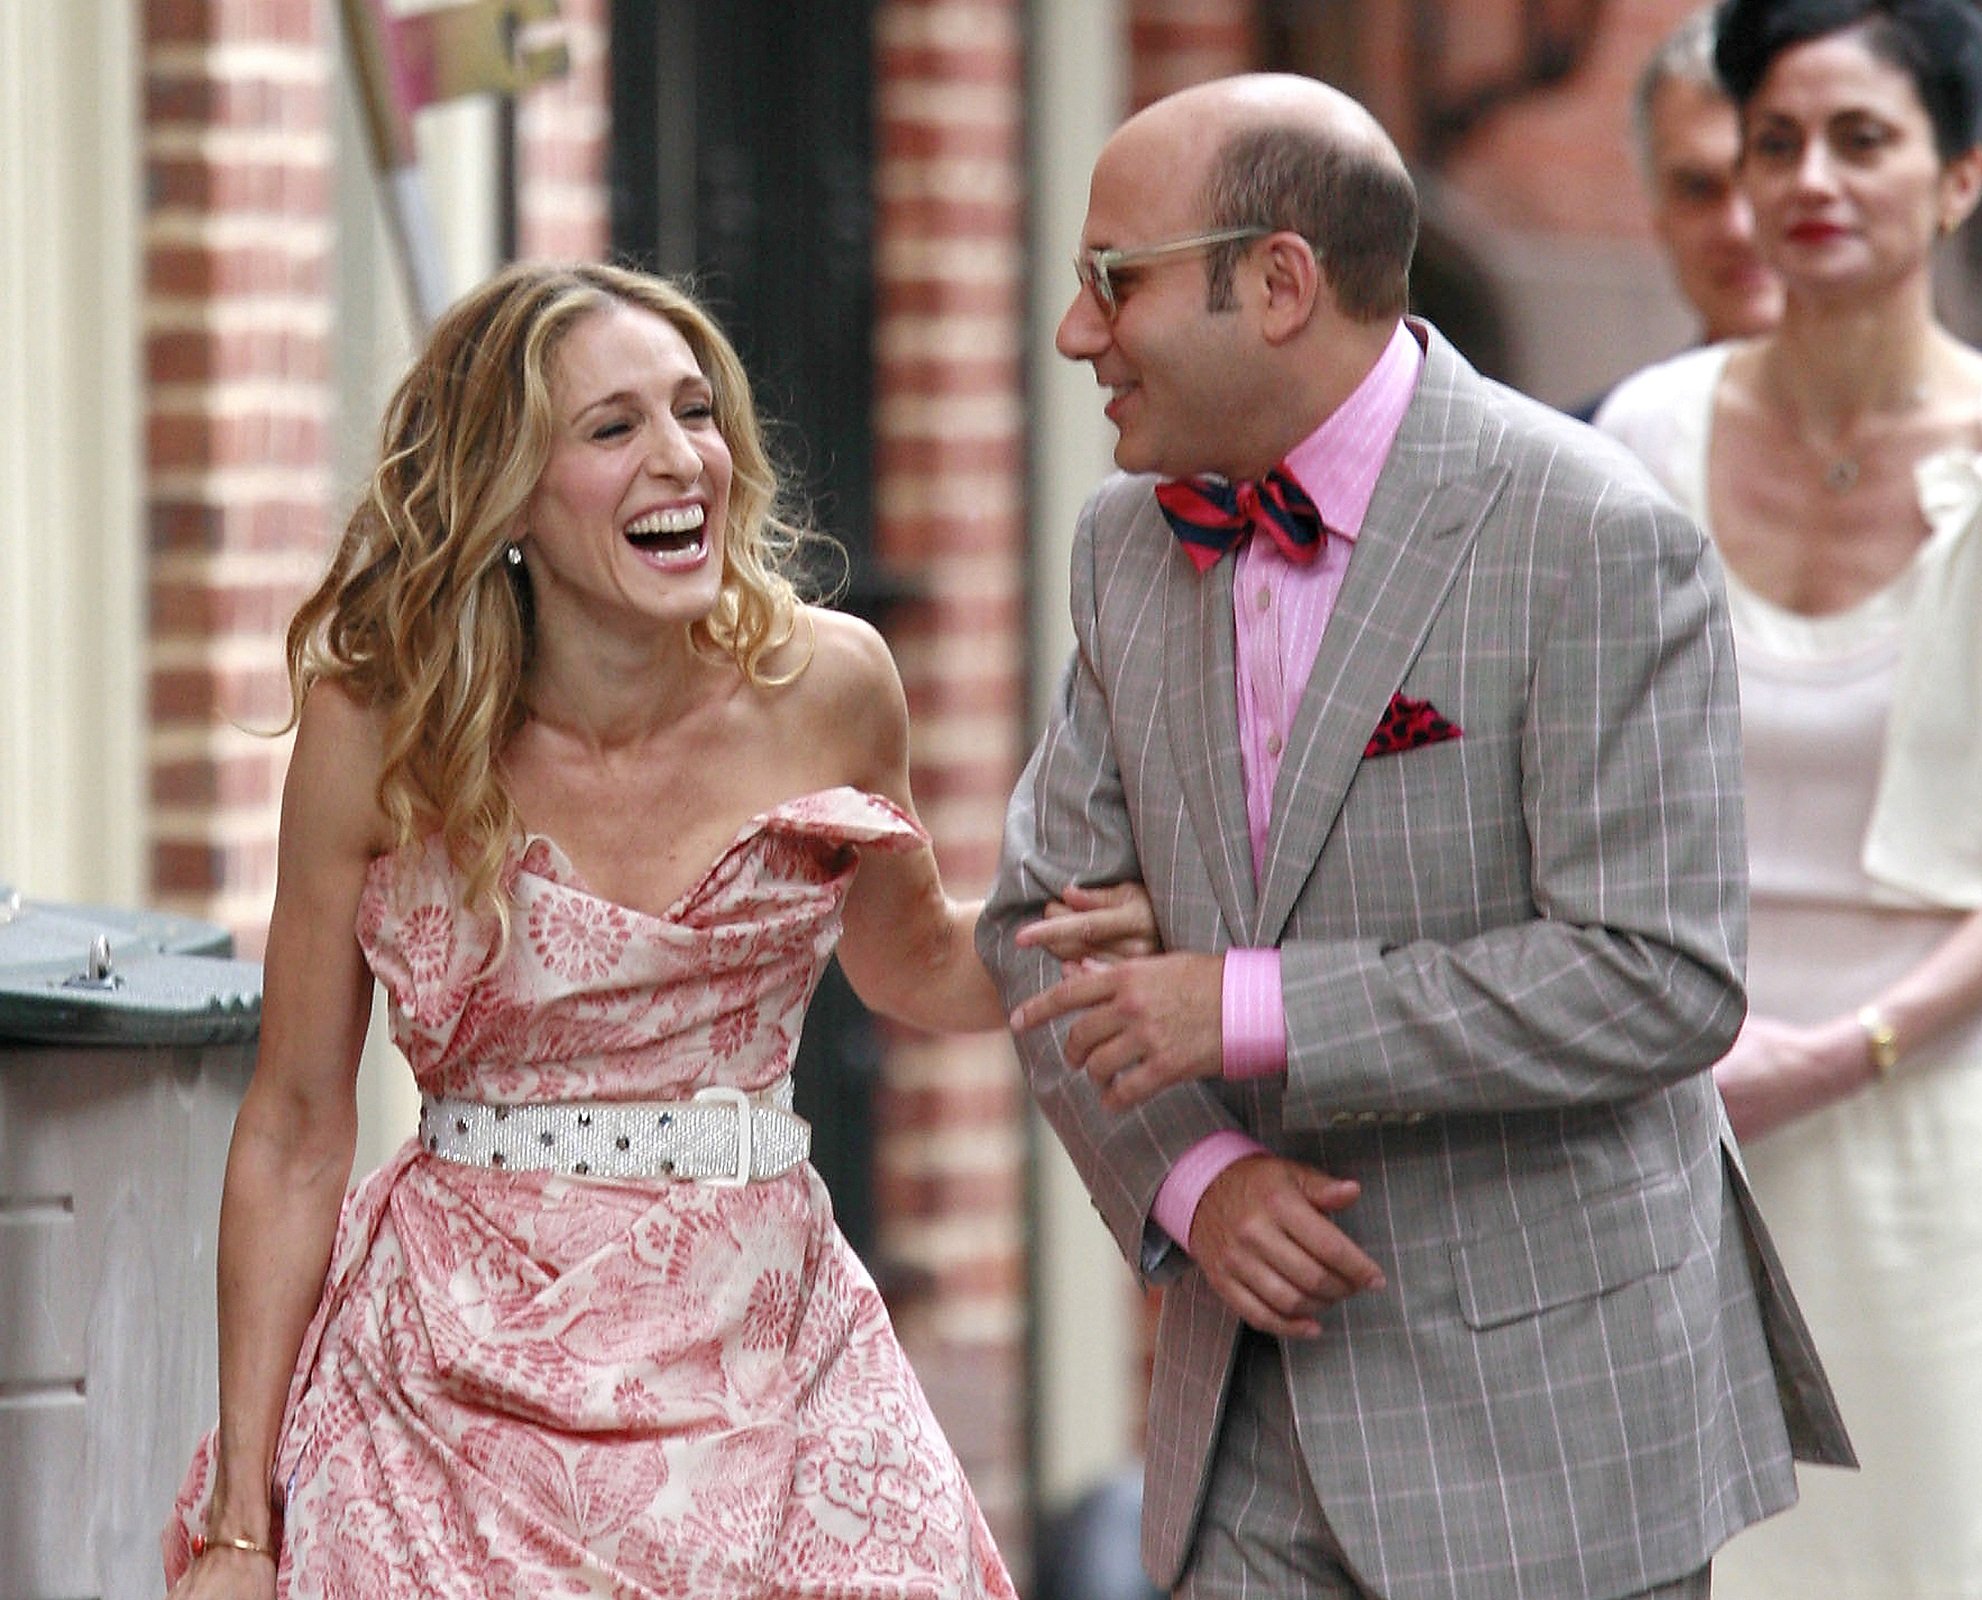 Sarah Jessica Parker and Willie Garson filming a scene for 'Sex and the City: The Movie'